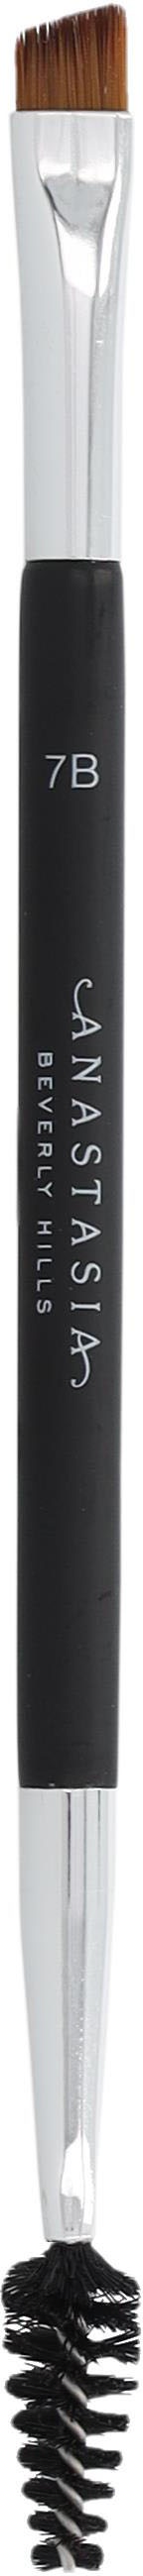 ANASTASIA BEVERLY HILLS Augenbrauenpinsel »Dual Ended Firm End...